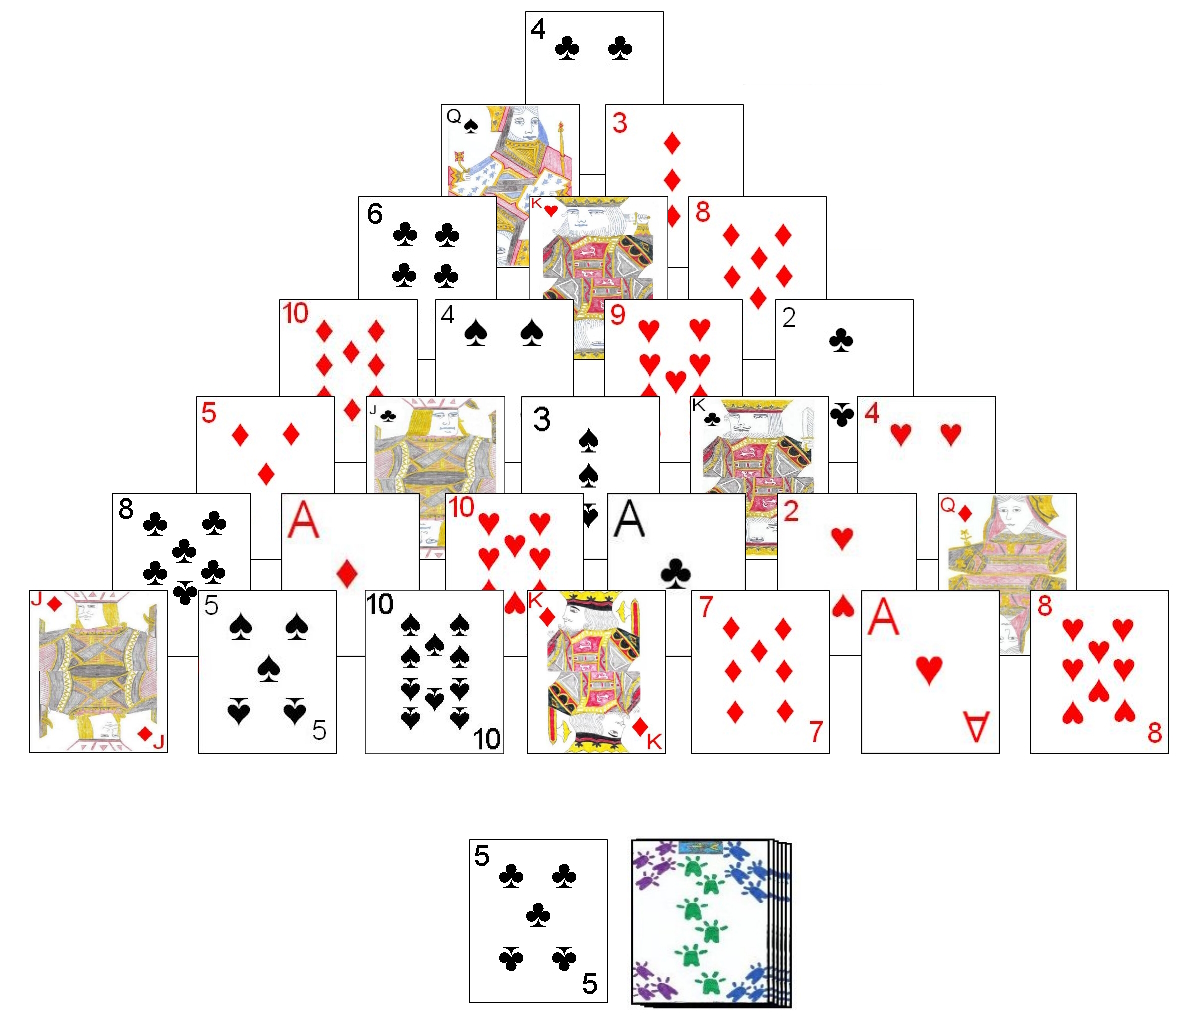 Example initial setup for Pyramid Solitaire